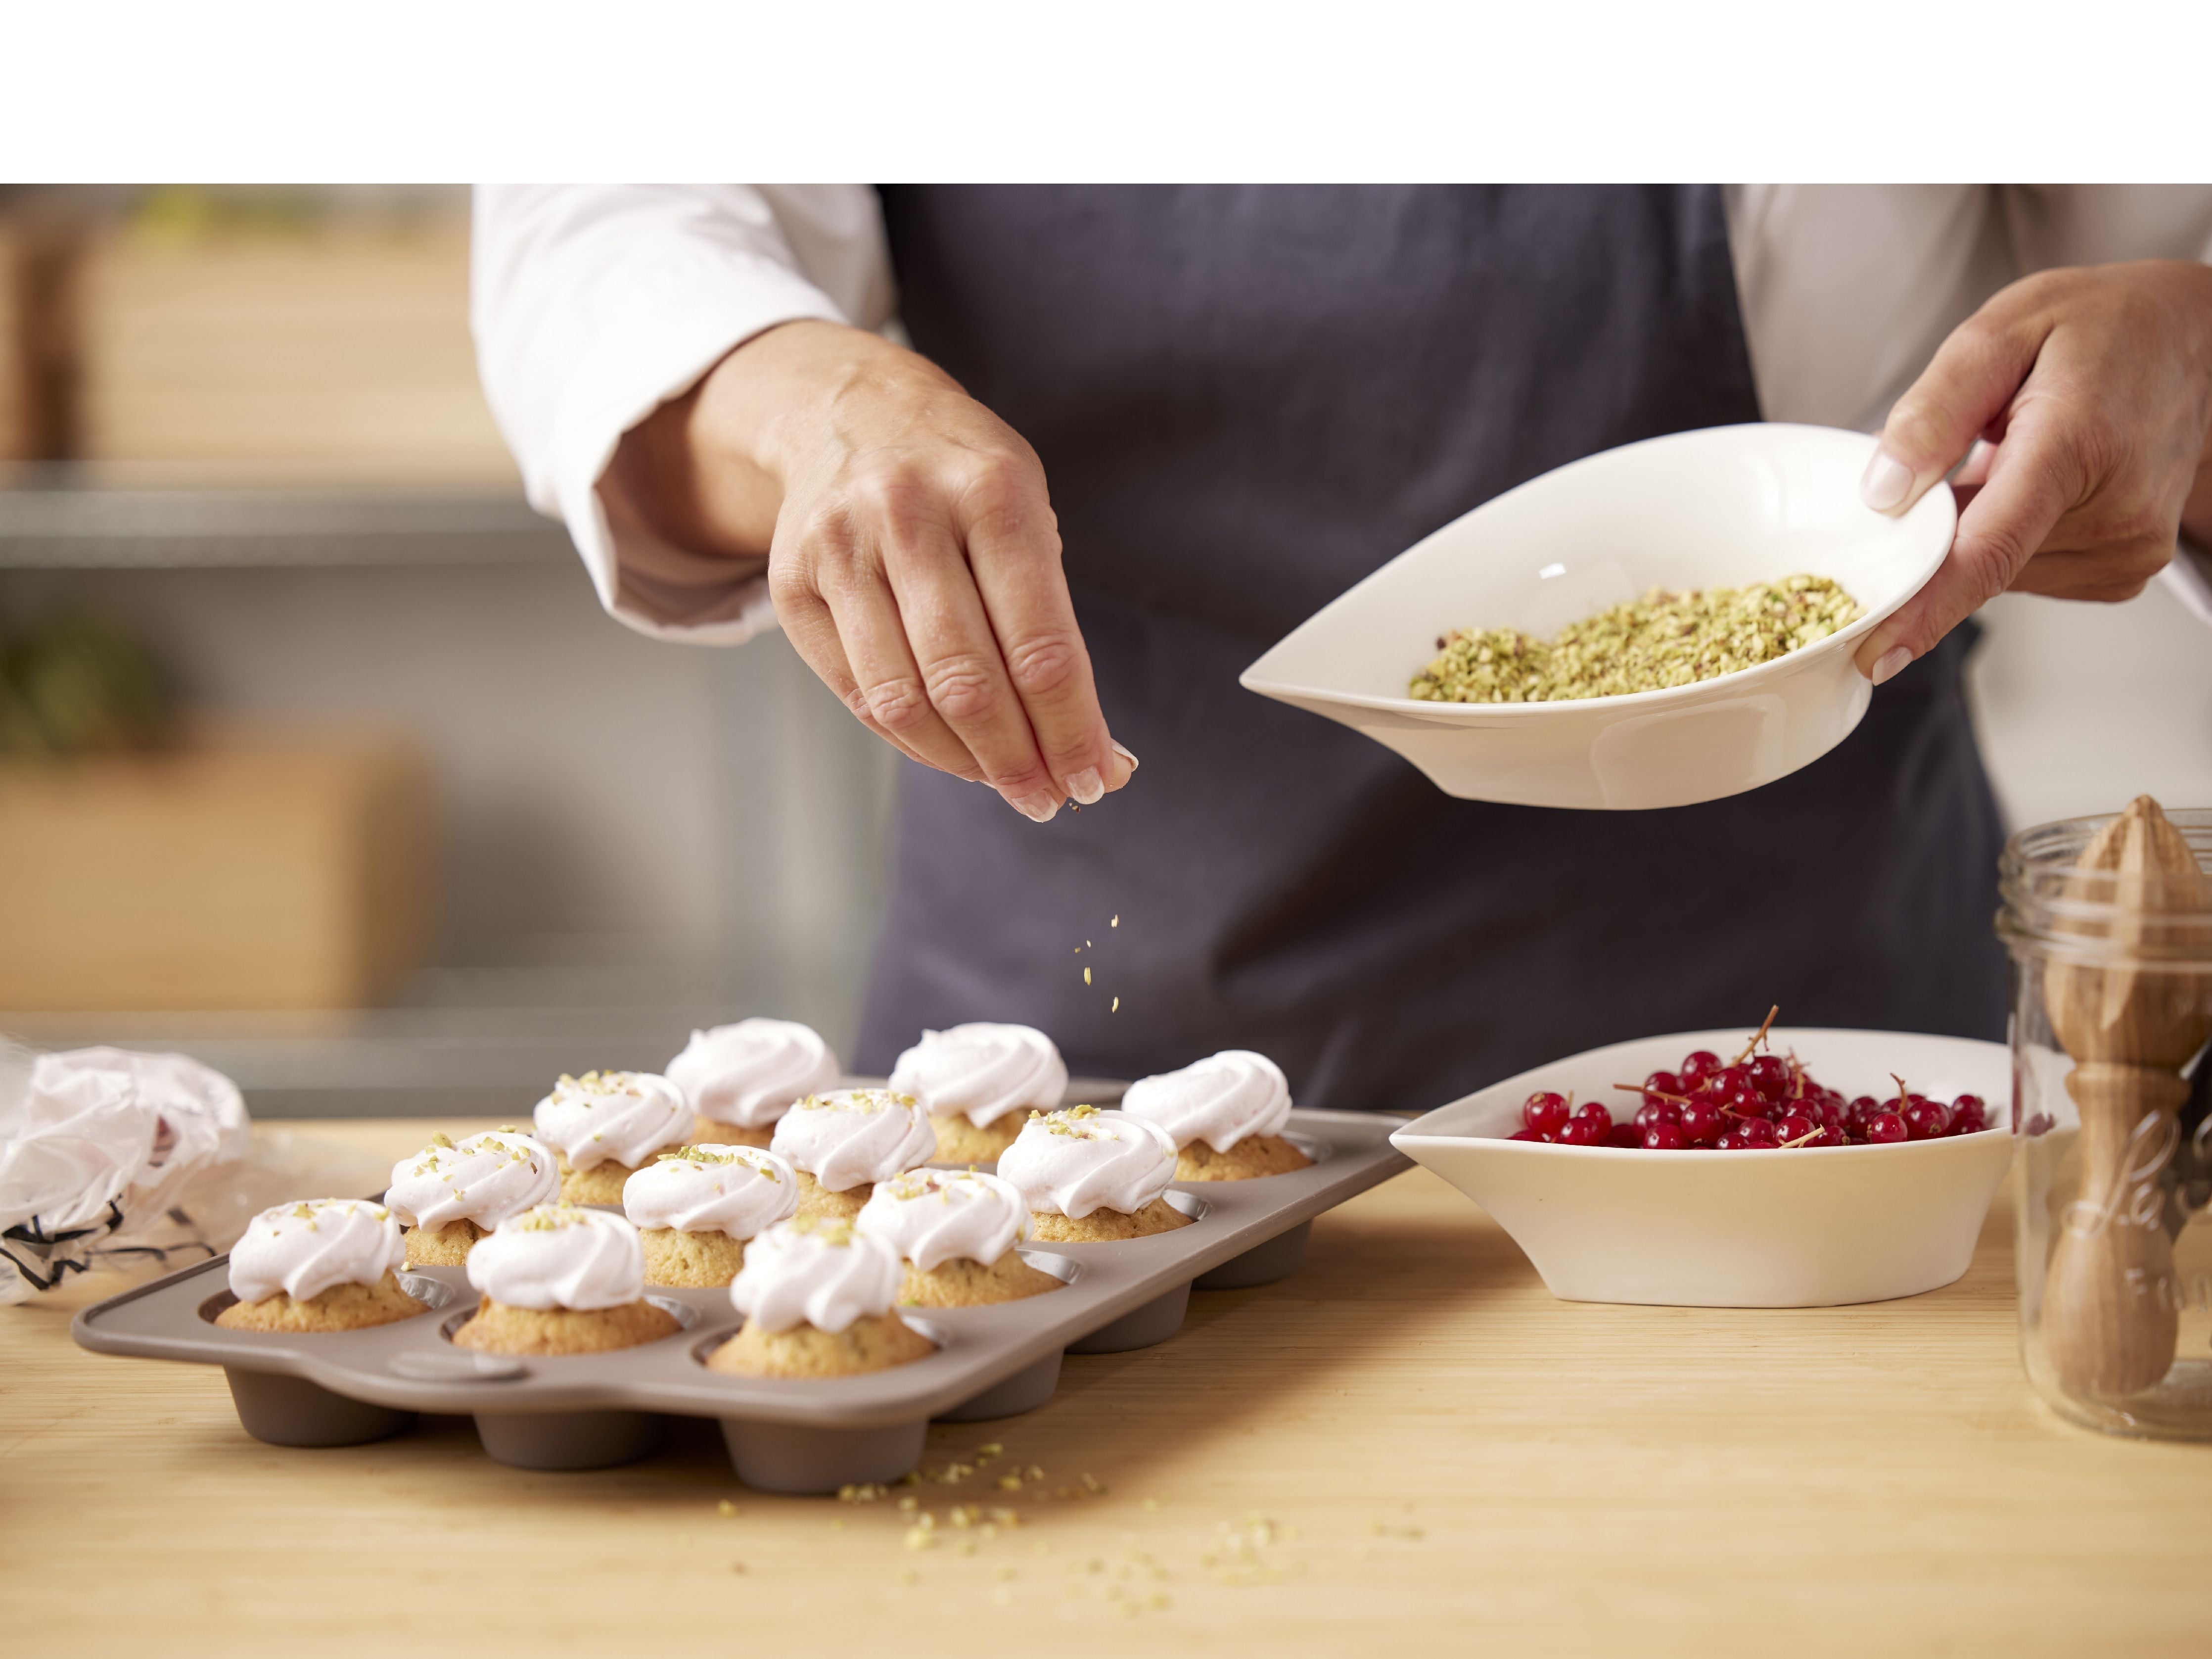 Blomsterbergs Muffin Pan For 12 Pieces, Latte